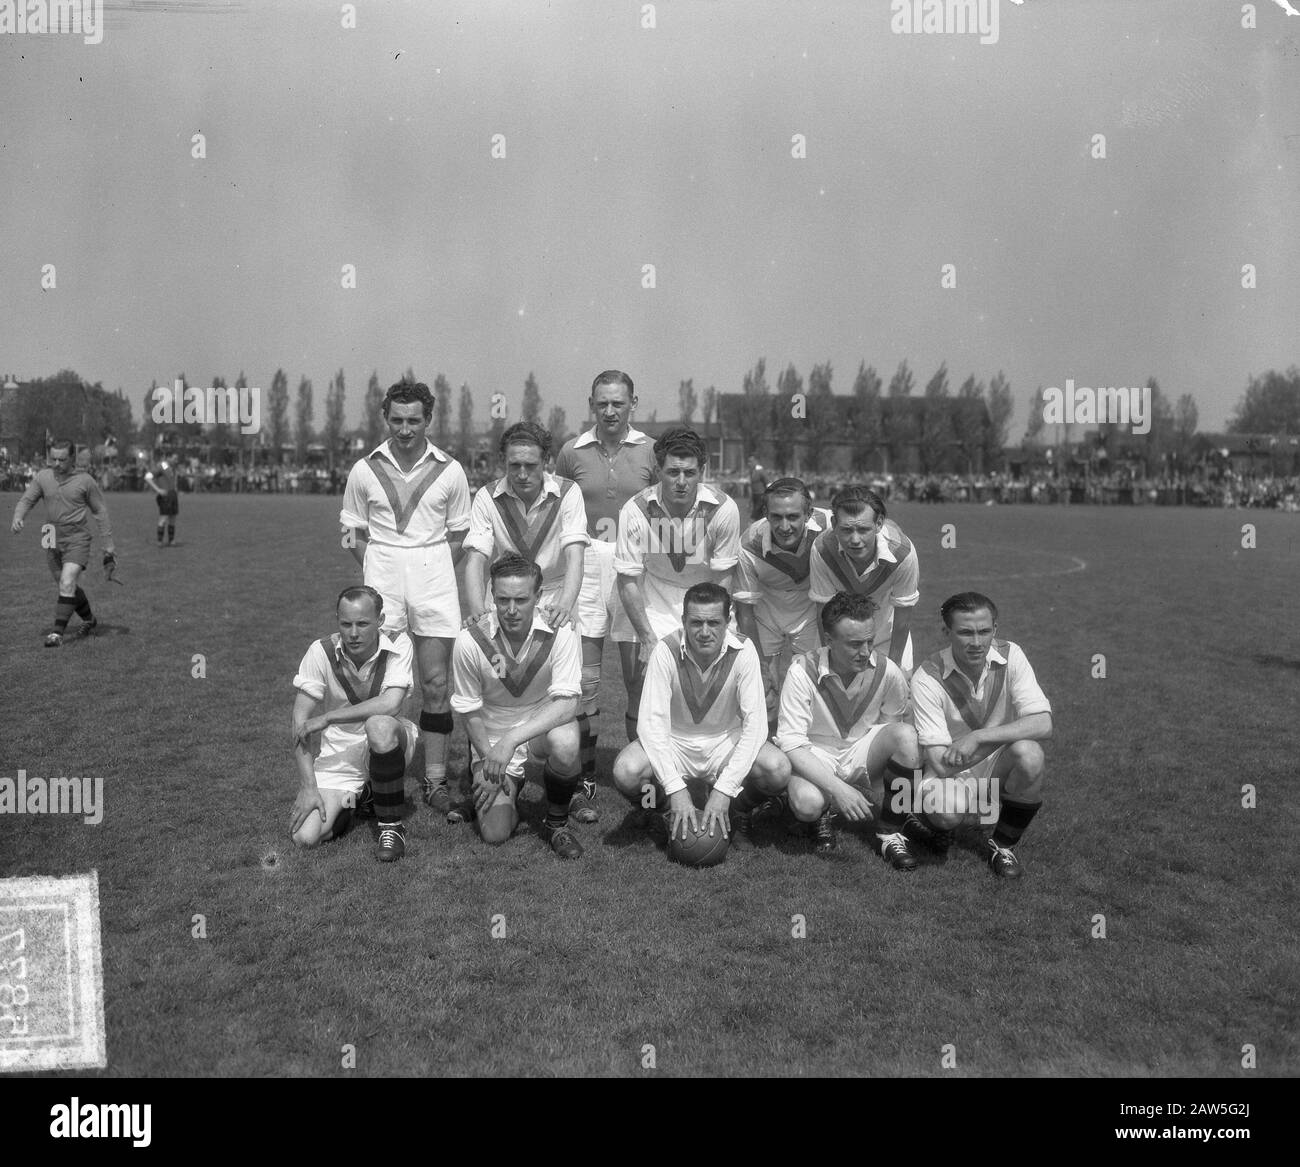 2nd class Promotiewedstrijd EBOH DHC 2-4. Team DHC Delft Annotation: Played in the field of DFC Date: May 24, 1951 Location: Dordrecht Keywords: teams, group portraits, sports, football, soccer Stock Photo